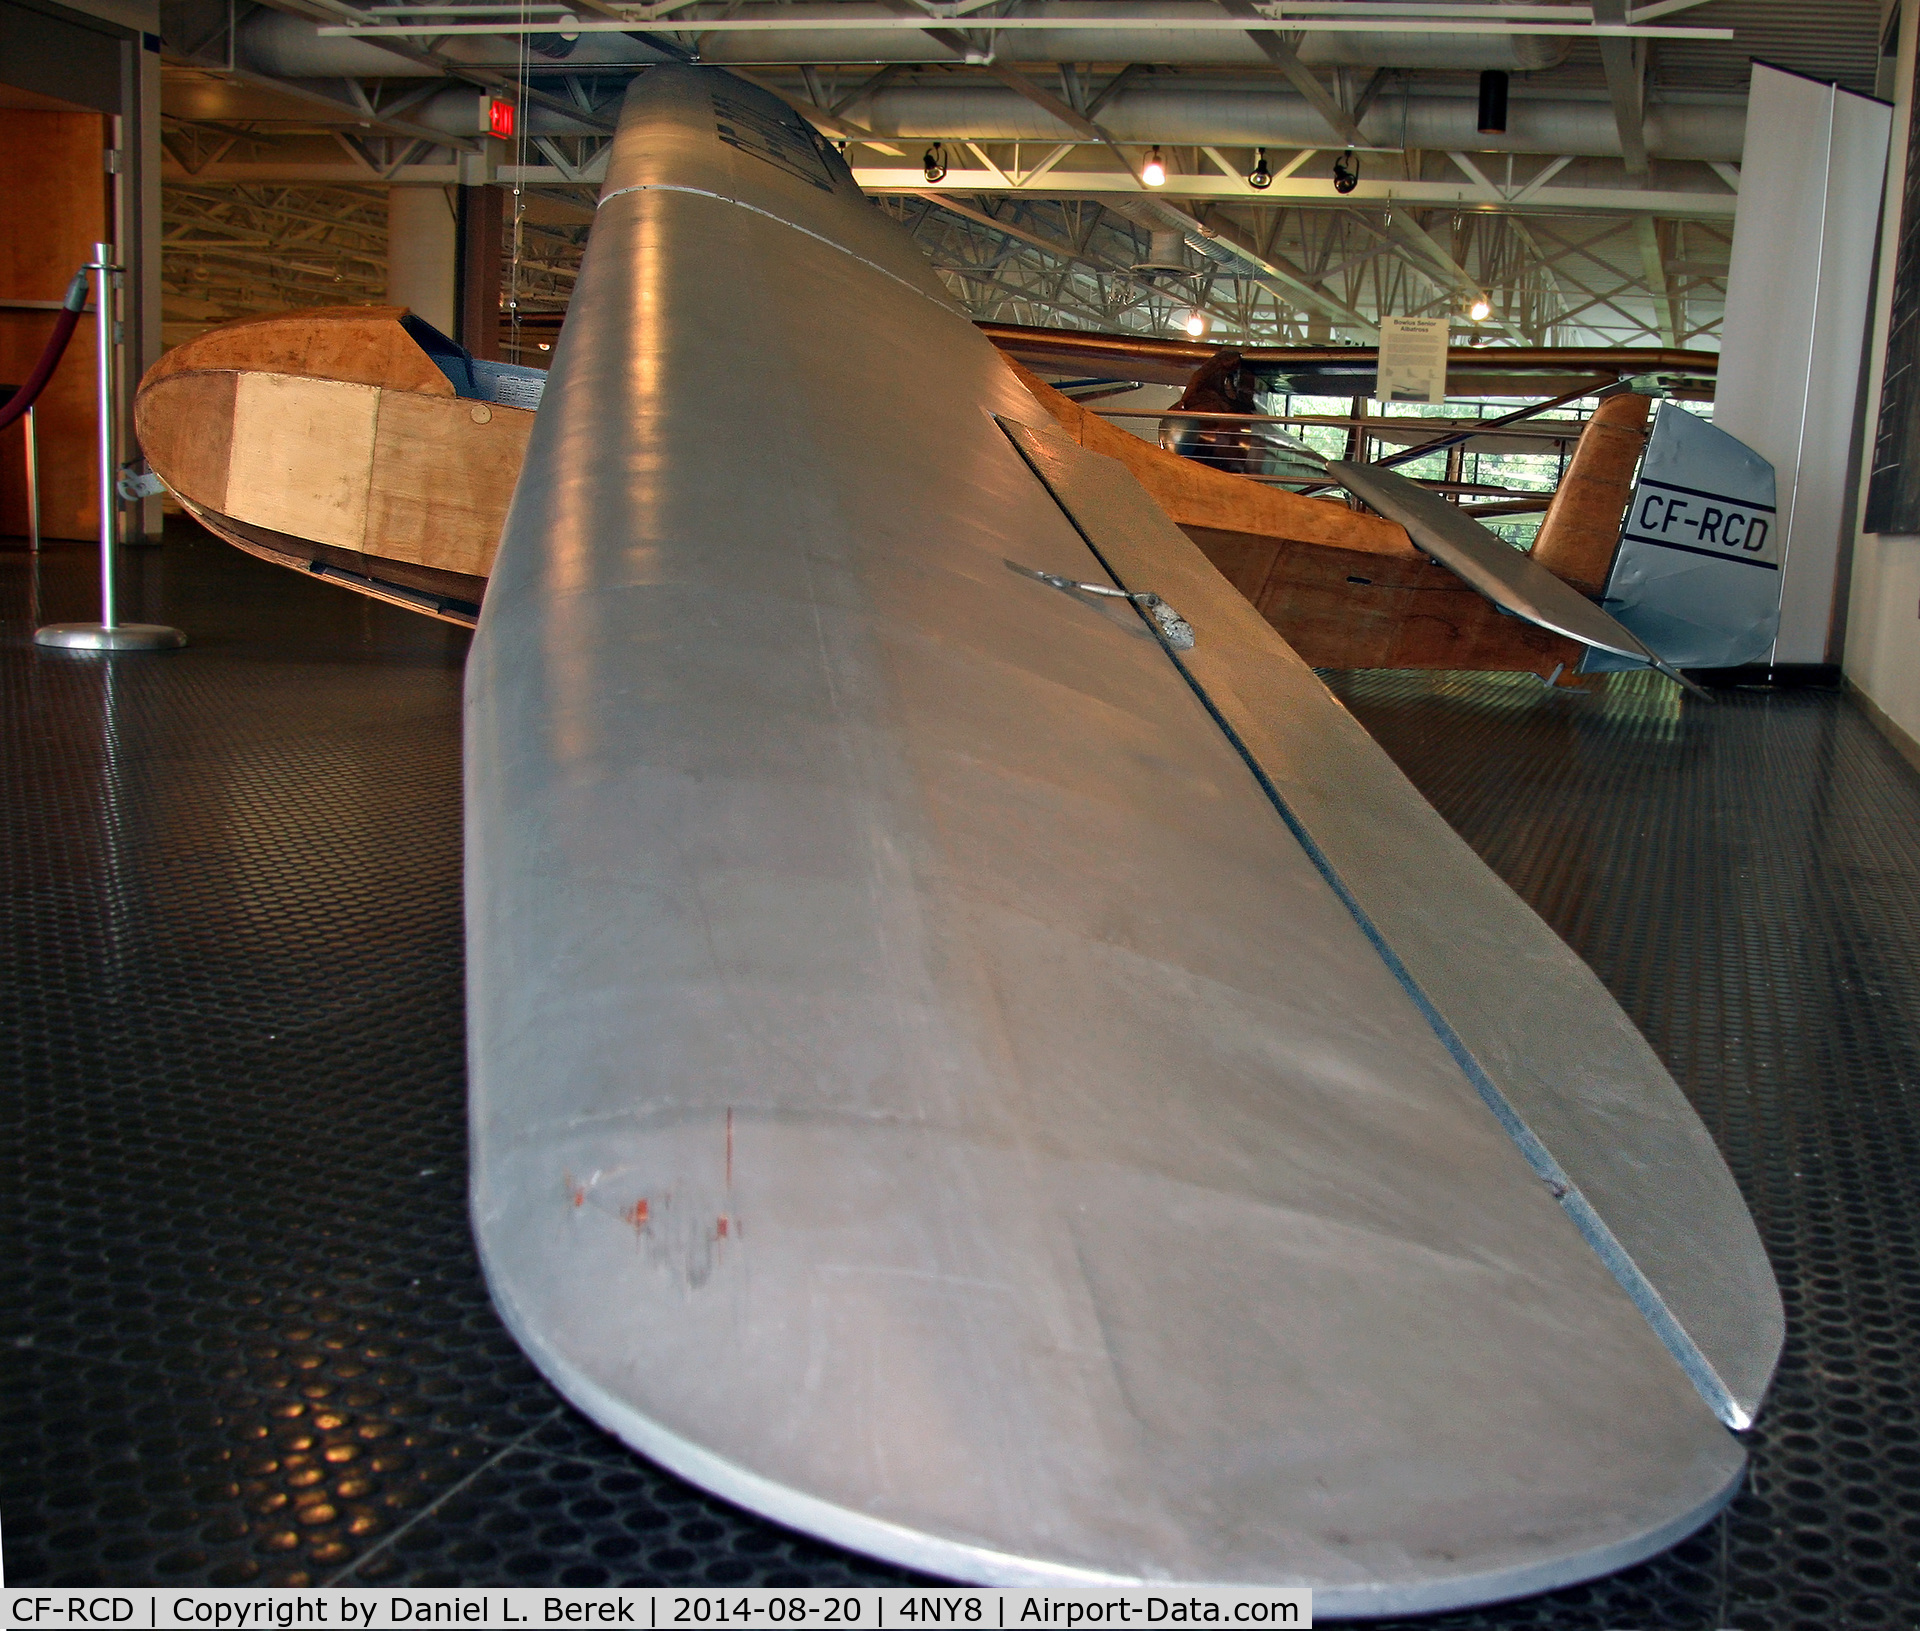 CF-RCD, 1934 Hutter HU-17 C/N WB153624, This fine glider, also known as a Goeppingen 5, was donated to the National Soaring Museum in 1975.